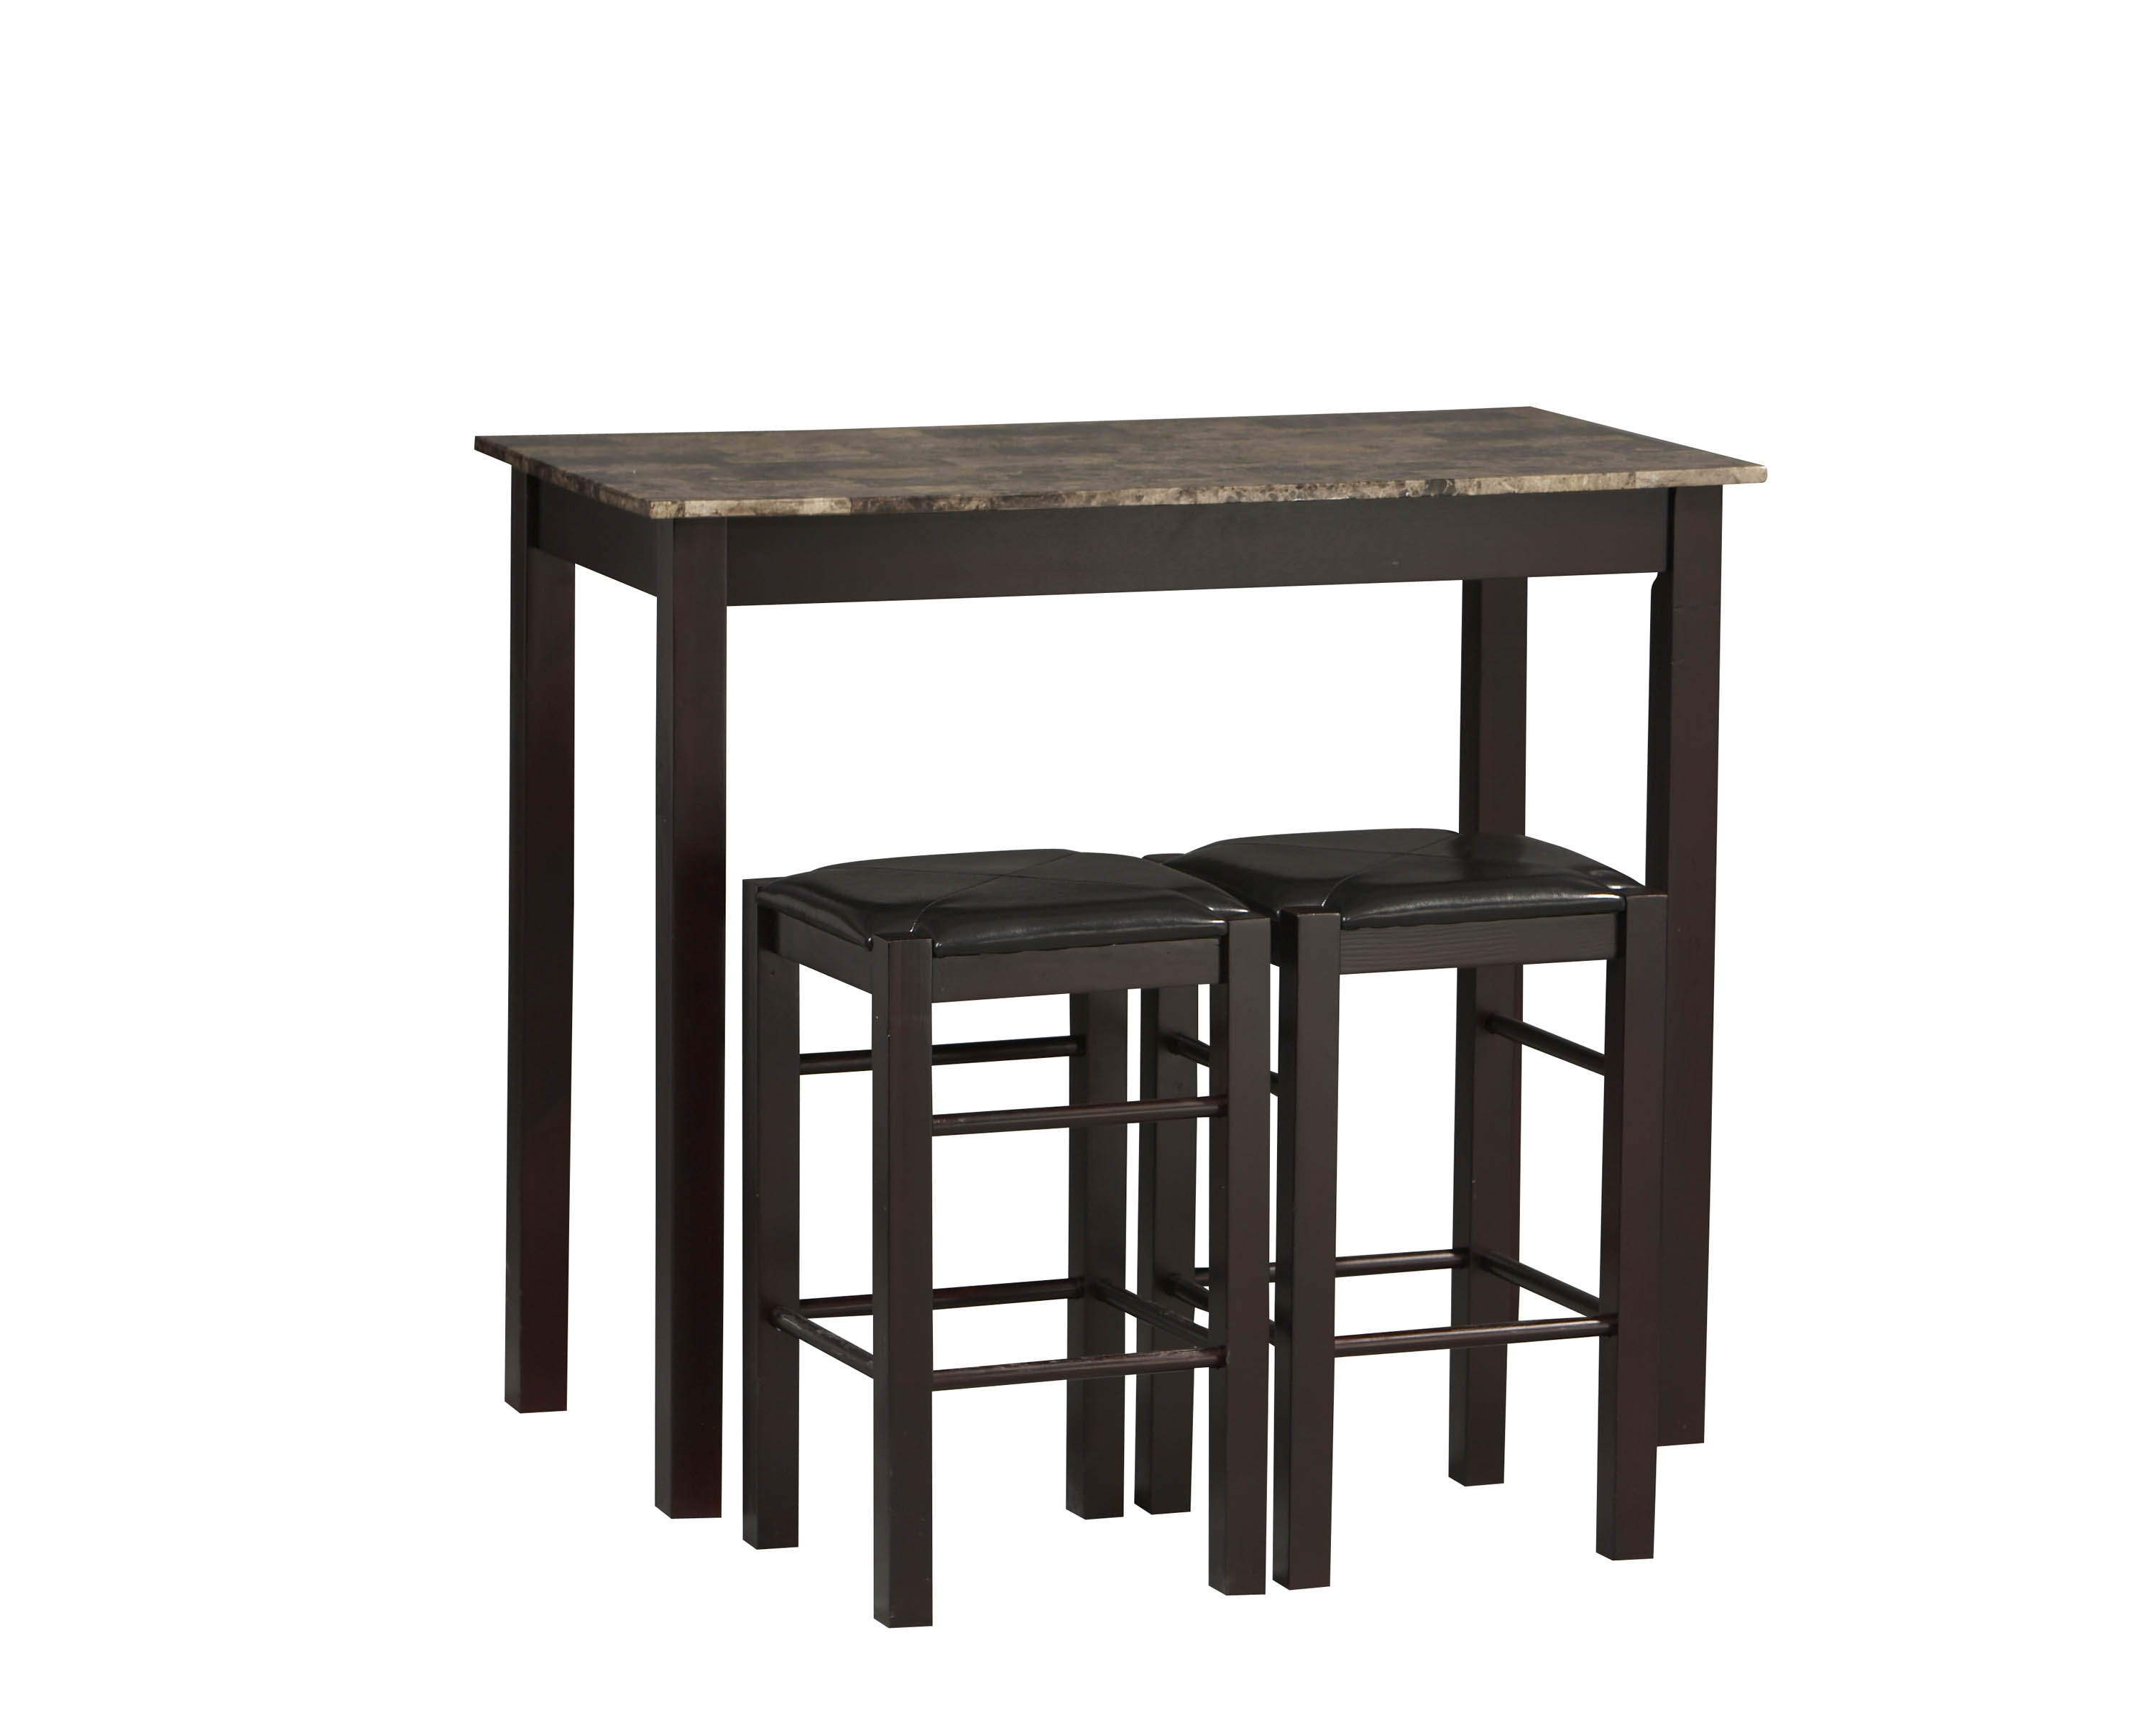 Linon Lancer 3-Piece Casual Dining Tavern Set, 25" Seat Height, Espresso Finish with Black Fabric - image 5 of 5